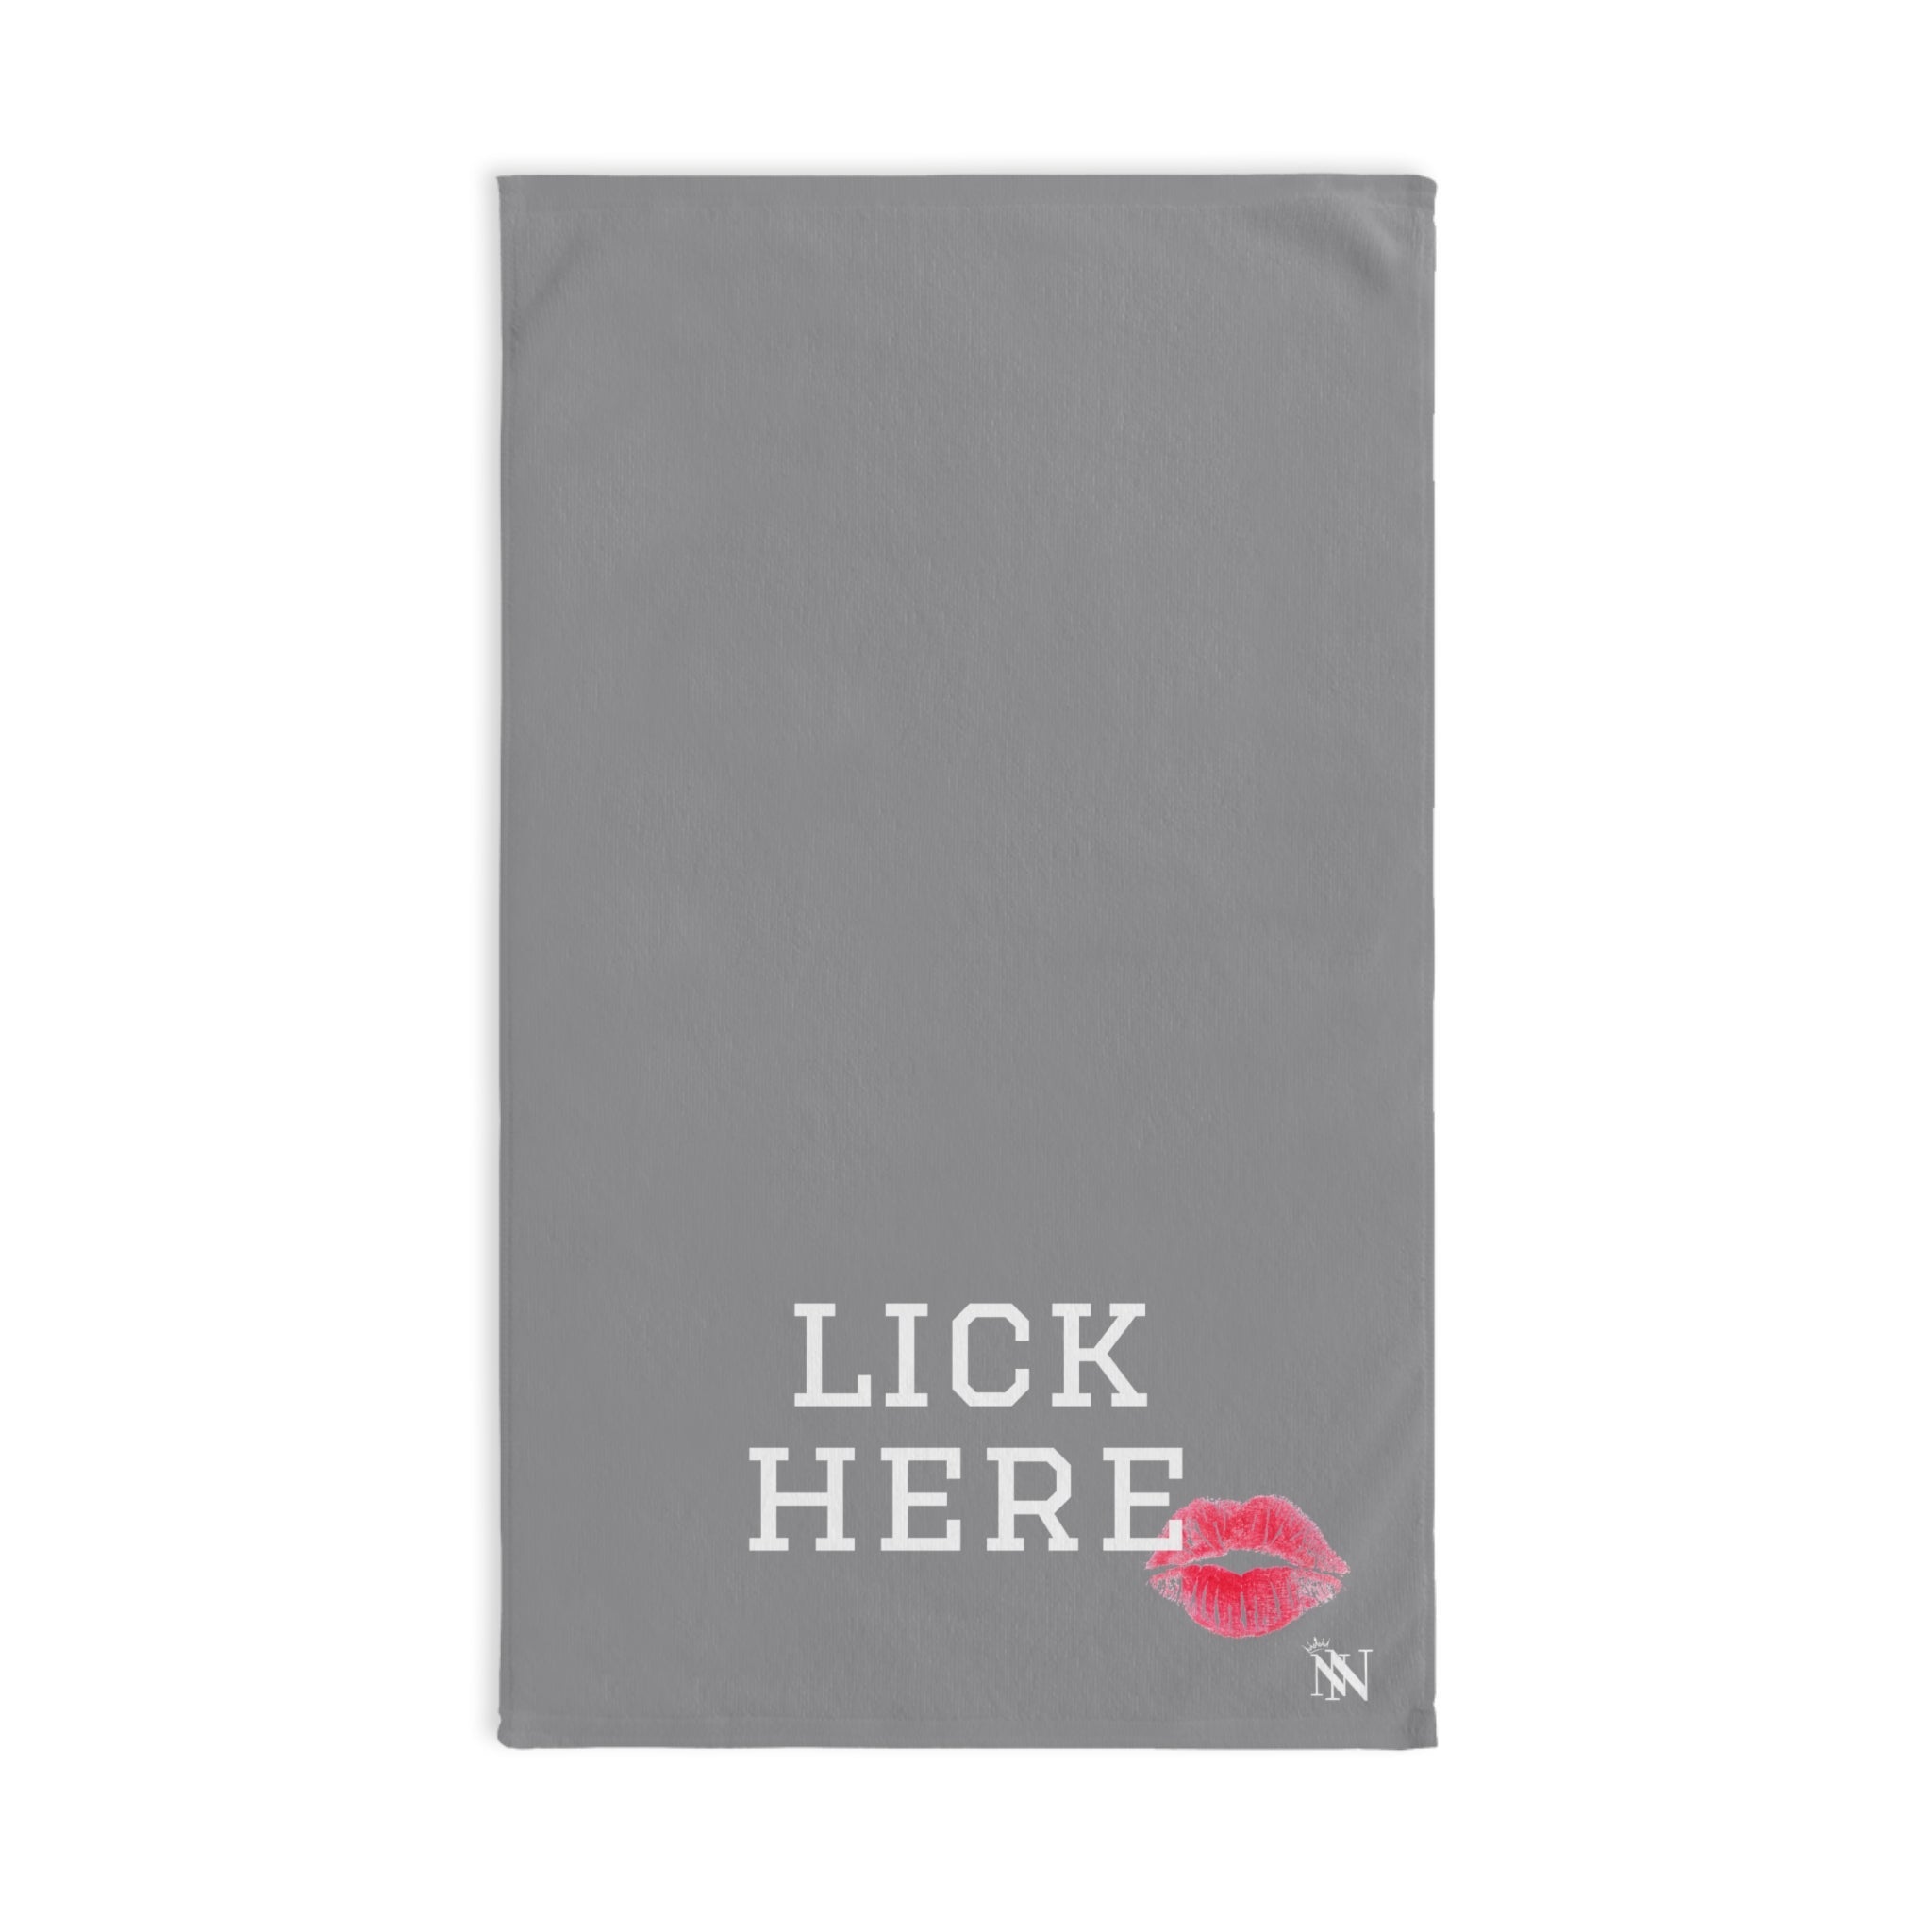 Lick Here KissingGrey | Anniversary Wedding, Christmas, Valentines Day, Birthday Gifts for Him, Her, Romantic Gifts for Wife, Girlfriend, Couples Gifts for Boyfriend, Husband NECTAR NAPKINS